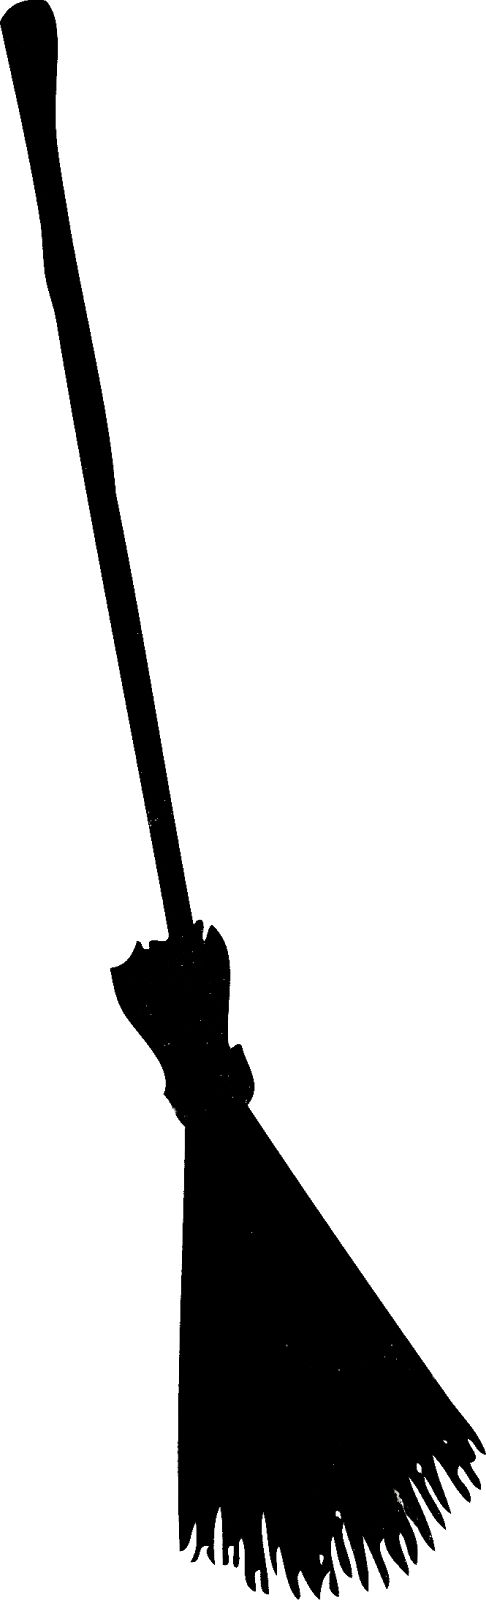 witches broom silhouette clipart - Clipground